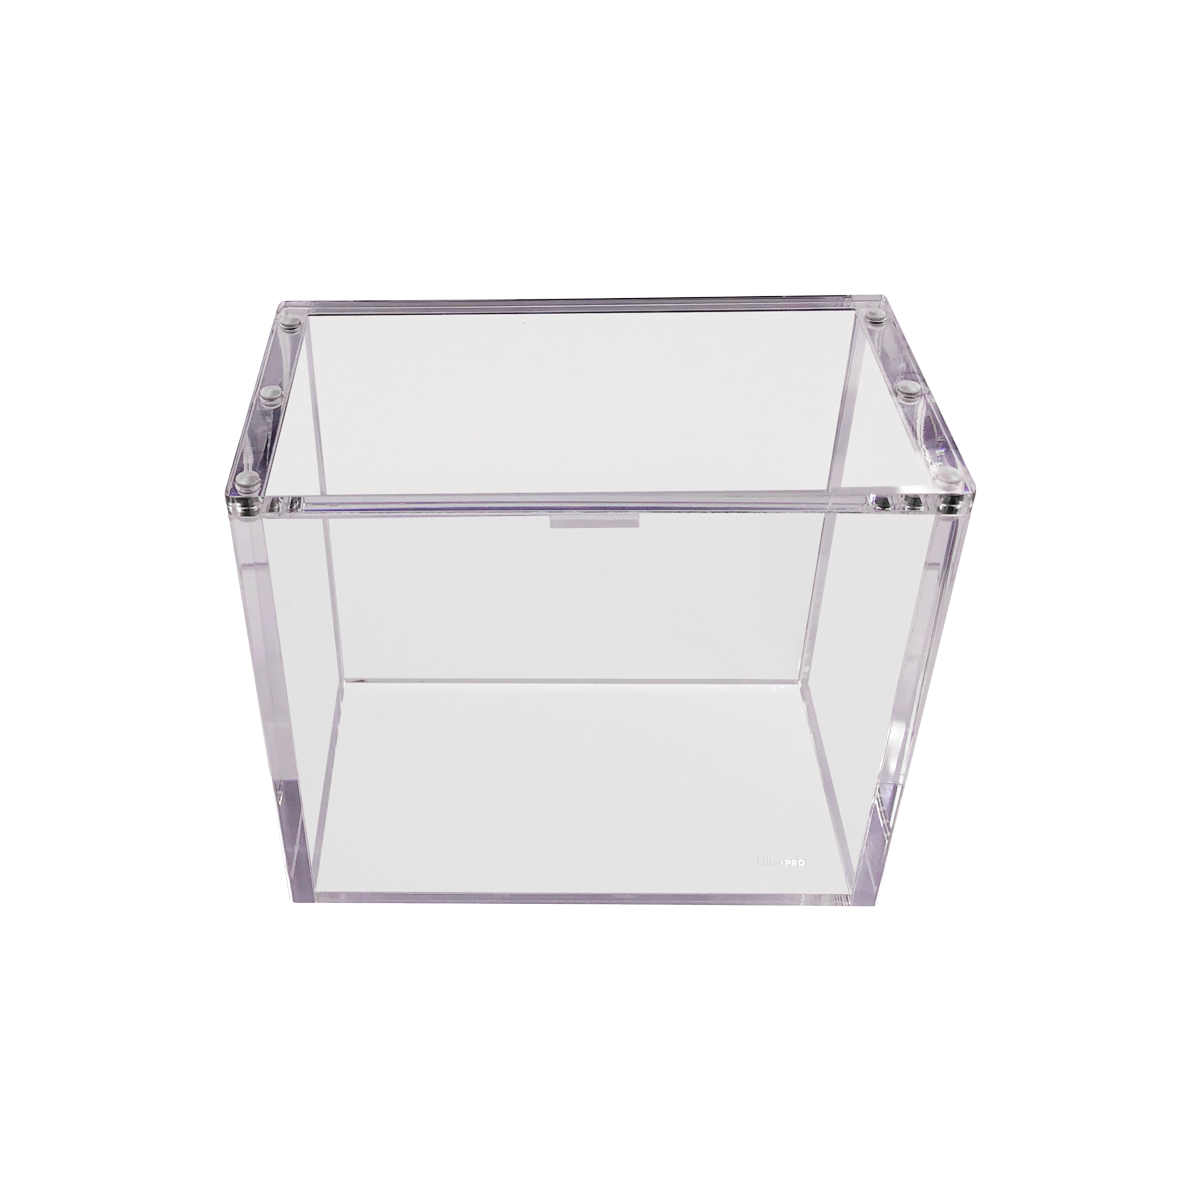 Booster Pack Display Case Box for LONG FOIL Pokémon Booster Packs